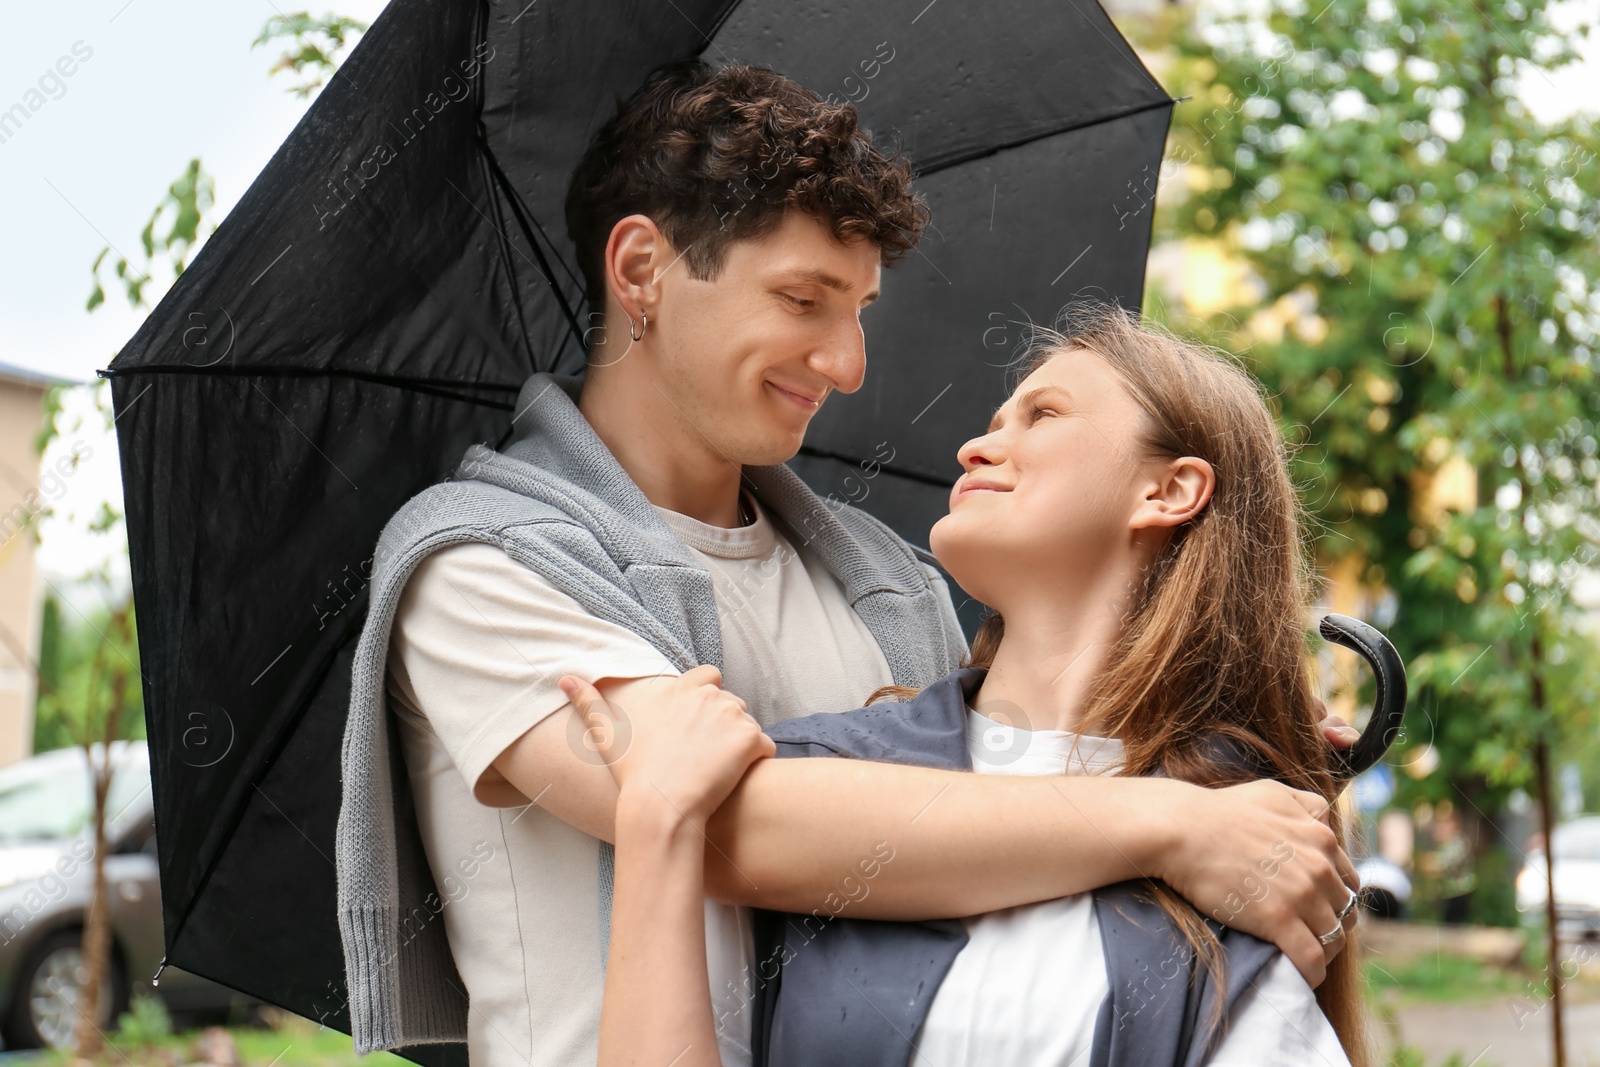 Photo of International dating. Lovely young couple with umbrella spending time together outdoors